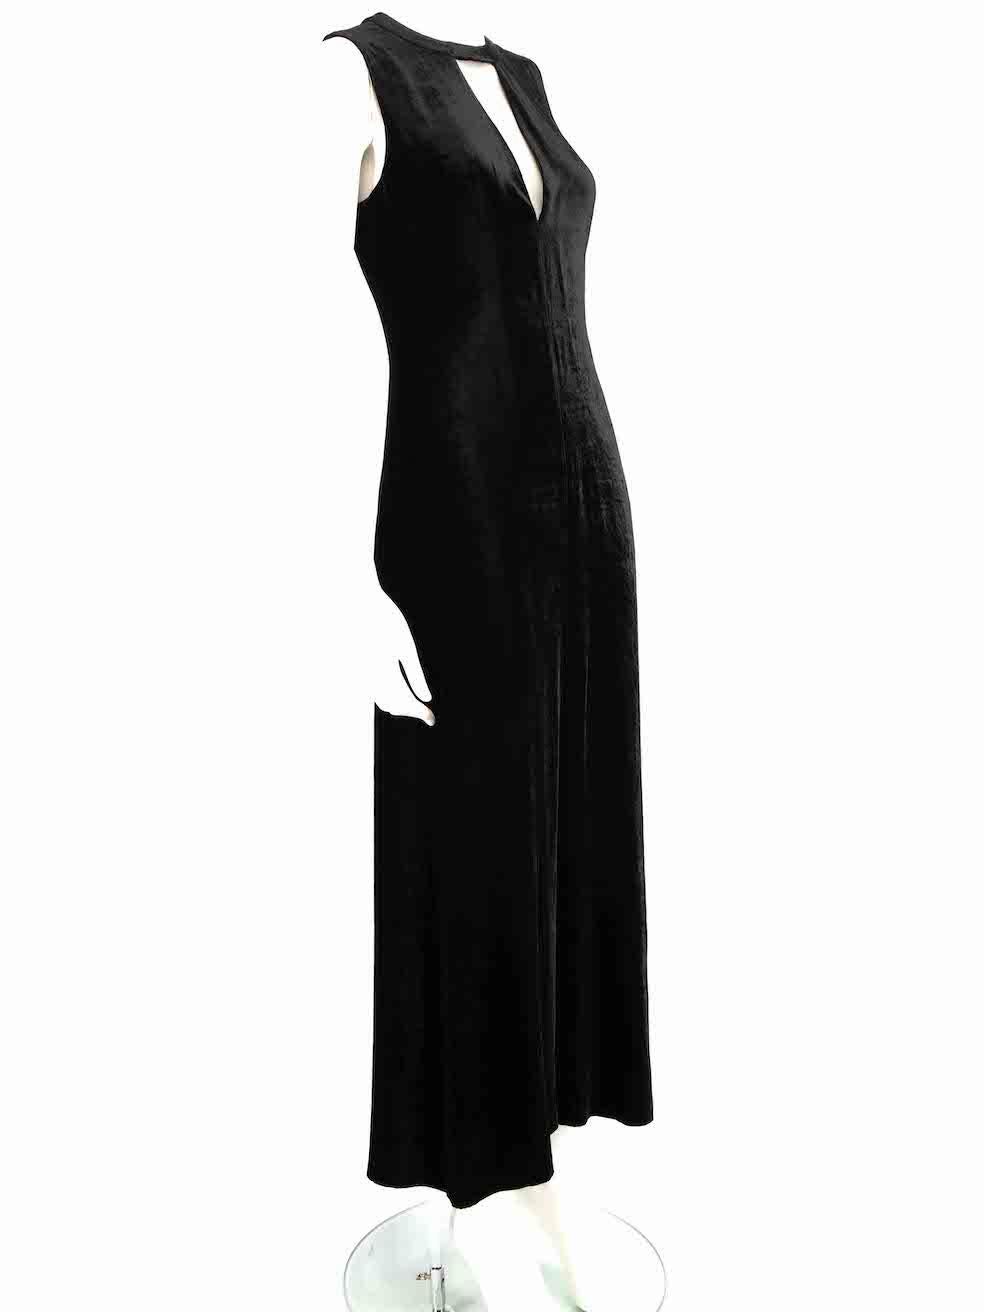 CONDITION is Very good. Hardly any visible wear to dress is evident on this used A.L.C. designer resale item.
 
 
 
 Details
 
 
 Black
 
 Velvet
 
 Dress
 
 Maxi
 
 Cut out v-neck
 
 Sleeveless
 
 Back zip and hook fastening
 
 
 
 
 
 Made in